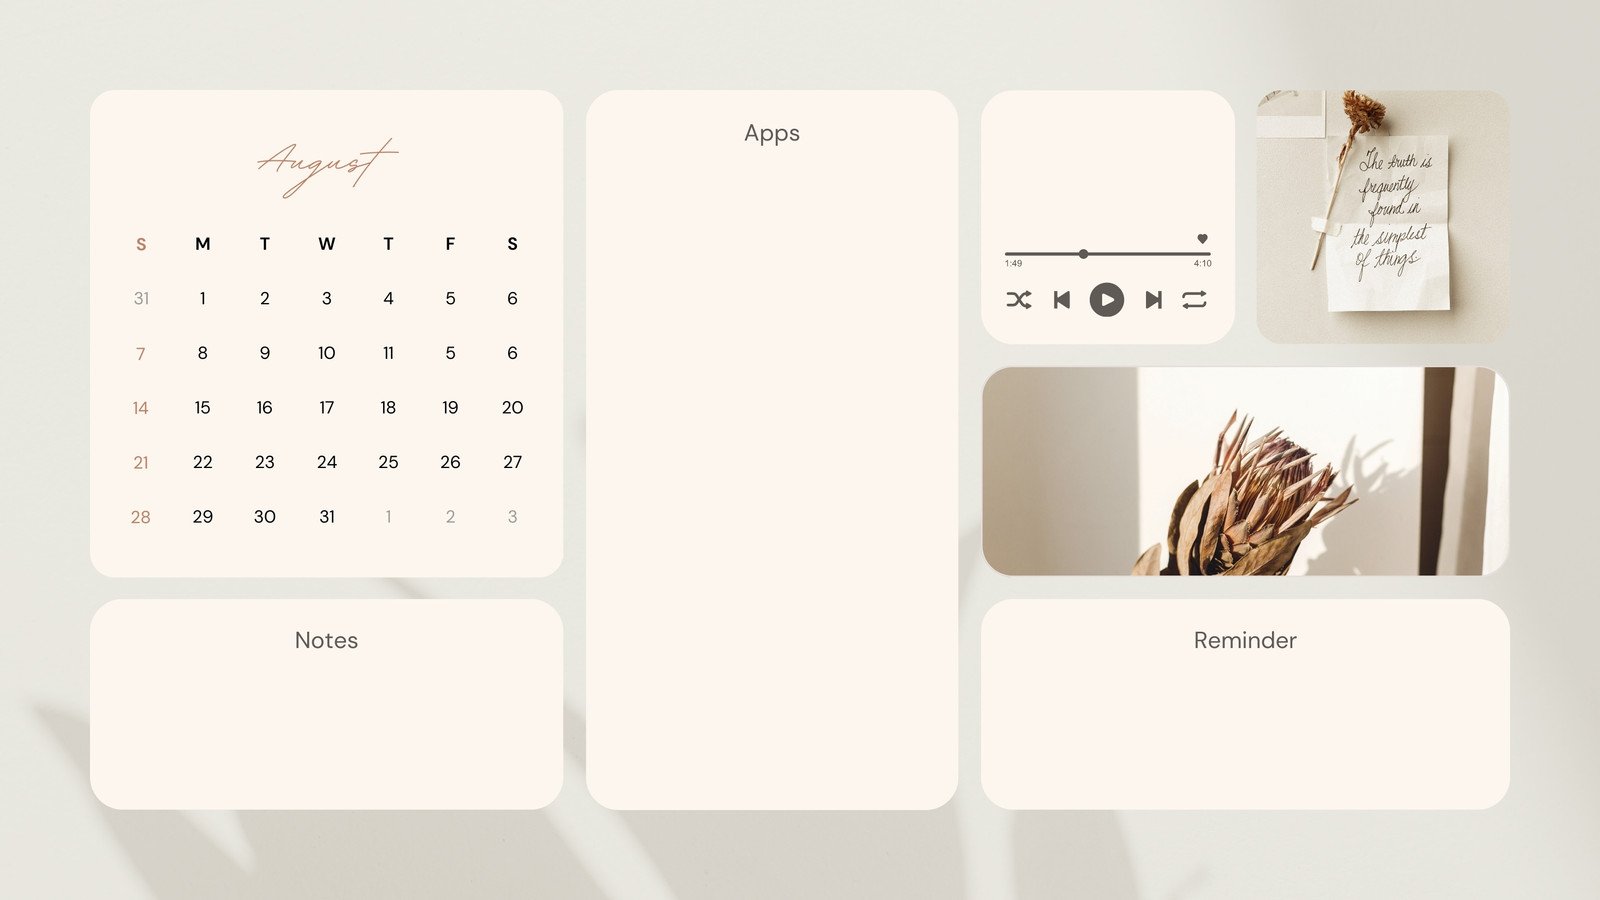 Free And Fully Customizable Desktop Wallpaper Templates Canva | vlr.eng.br